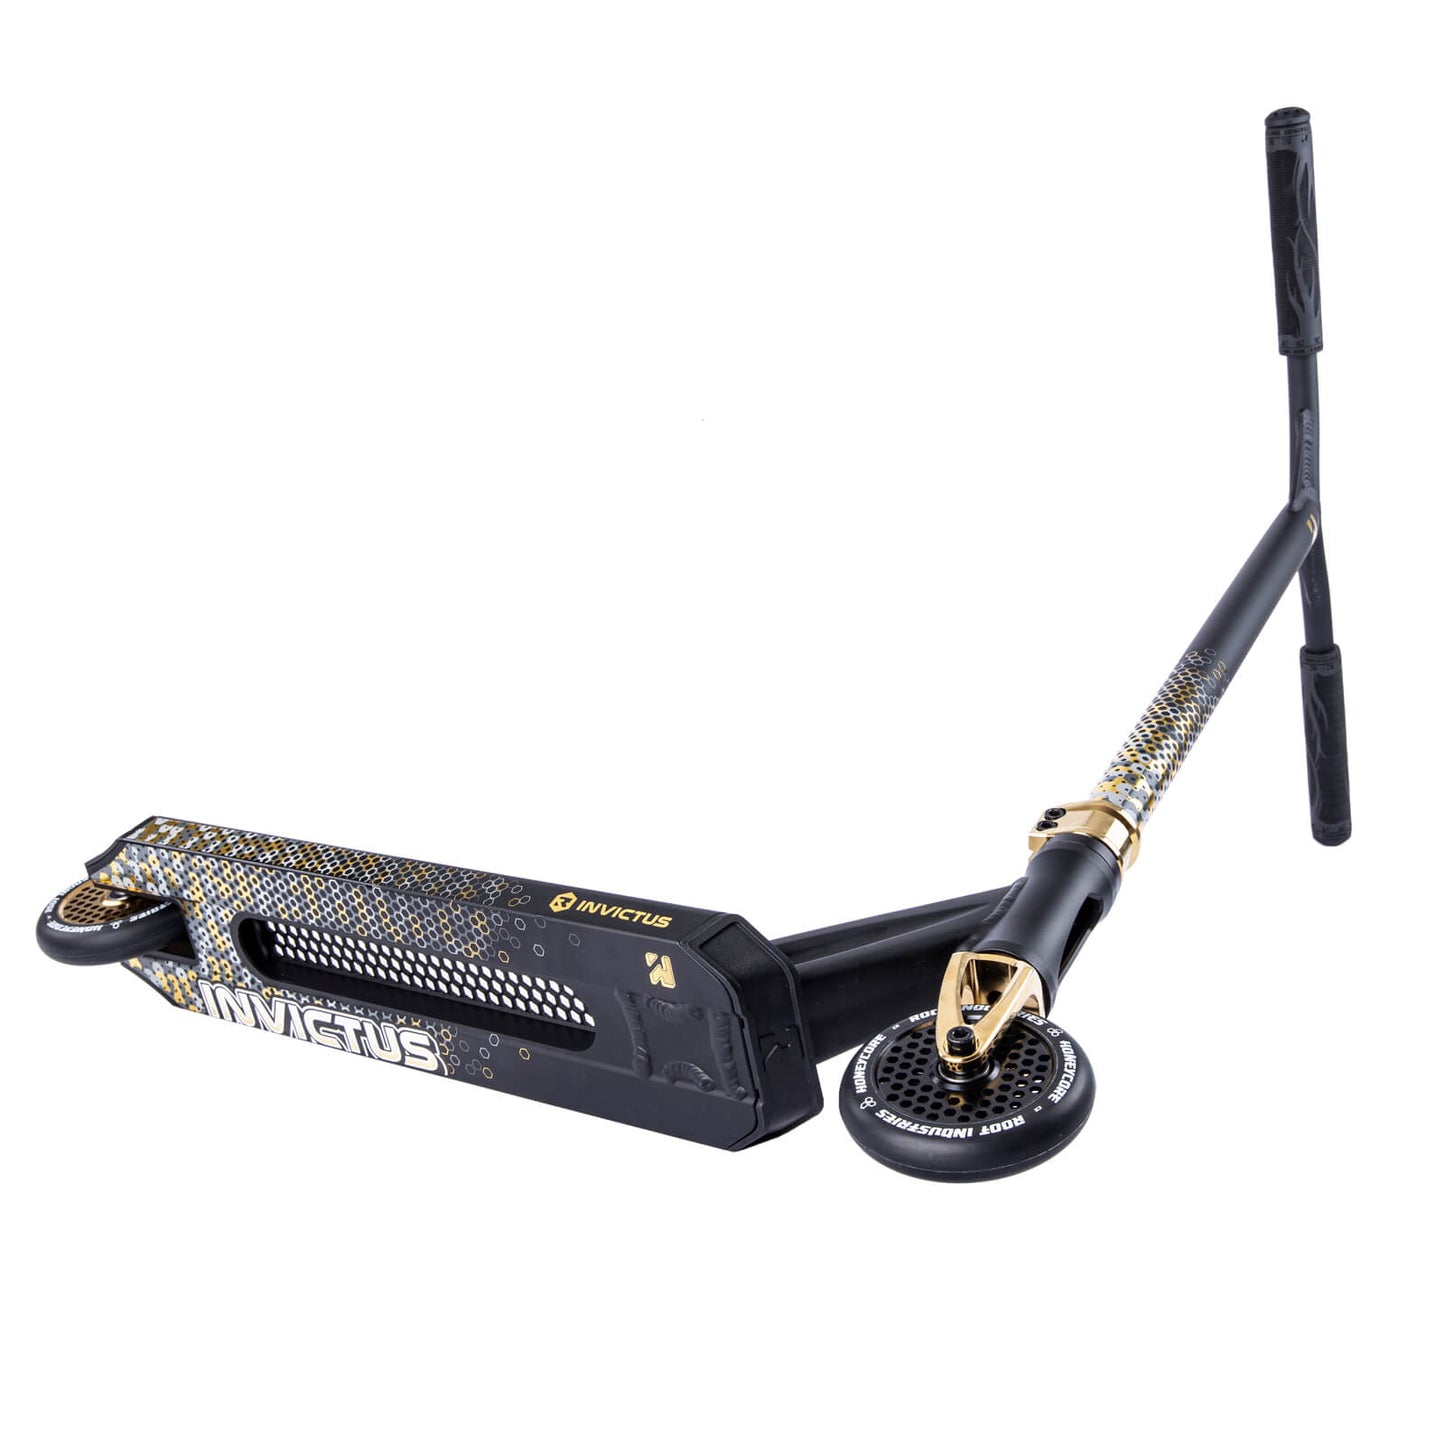 ROOT INDUSTRIES Invictus 2 Pro Scooter Black/Gold Rush